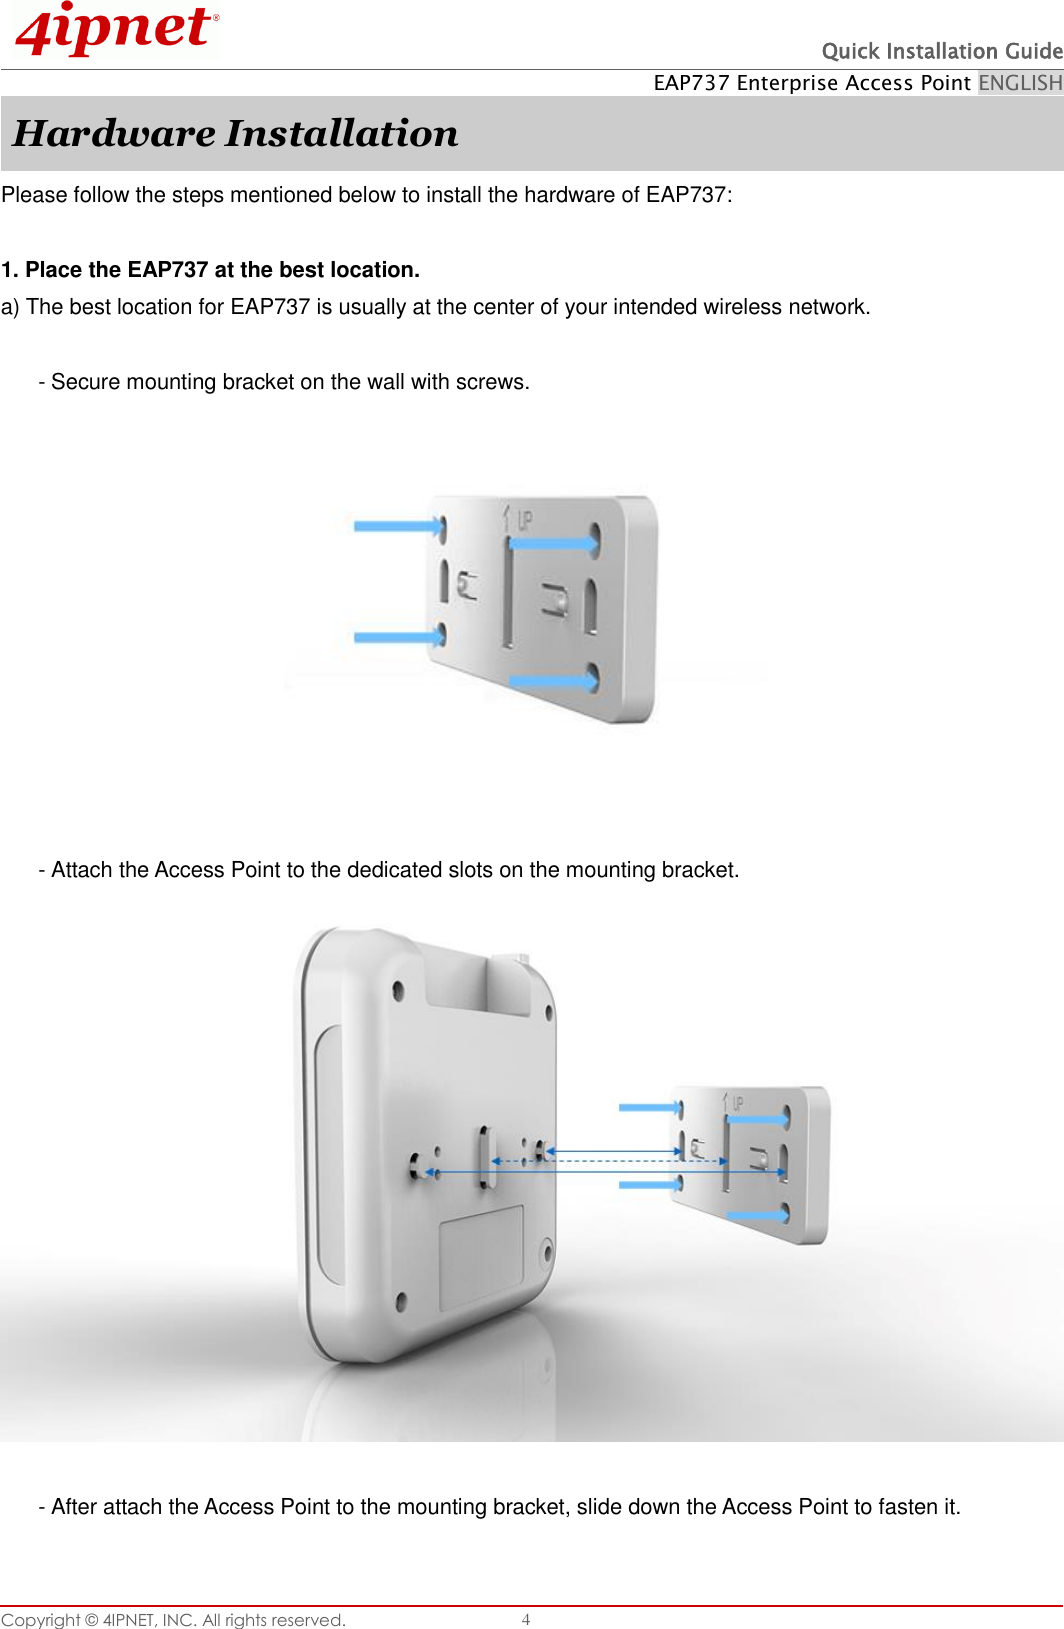  Quick Installation Guide EAP737 Enterprise Access Point ENGLISH Copyright ©  4IPNET, INC. All rights reserved.   4 Hardware Installation Please follow the steps mentioned below to install the hardware of EAP737:  1. Place the EAP737 at the best location. a) The best location for EAP737 is usually at the center of your intended wireless network.  - Secure mounting bracket on the wall with screws.     - Attach the Access Point to the dedicated slots on the mounting bracket.   - After attach the Access Point to the mounting bracket, slide down the Access Point to fasten it.  